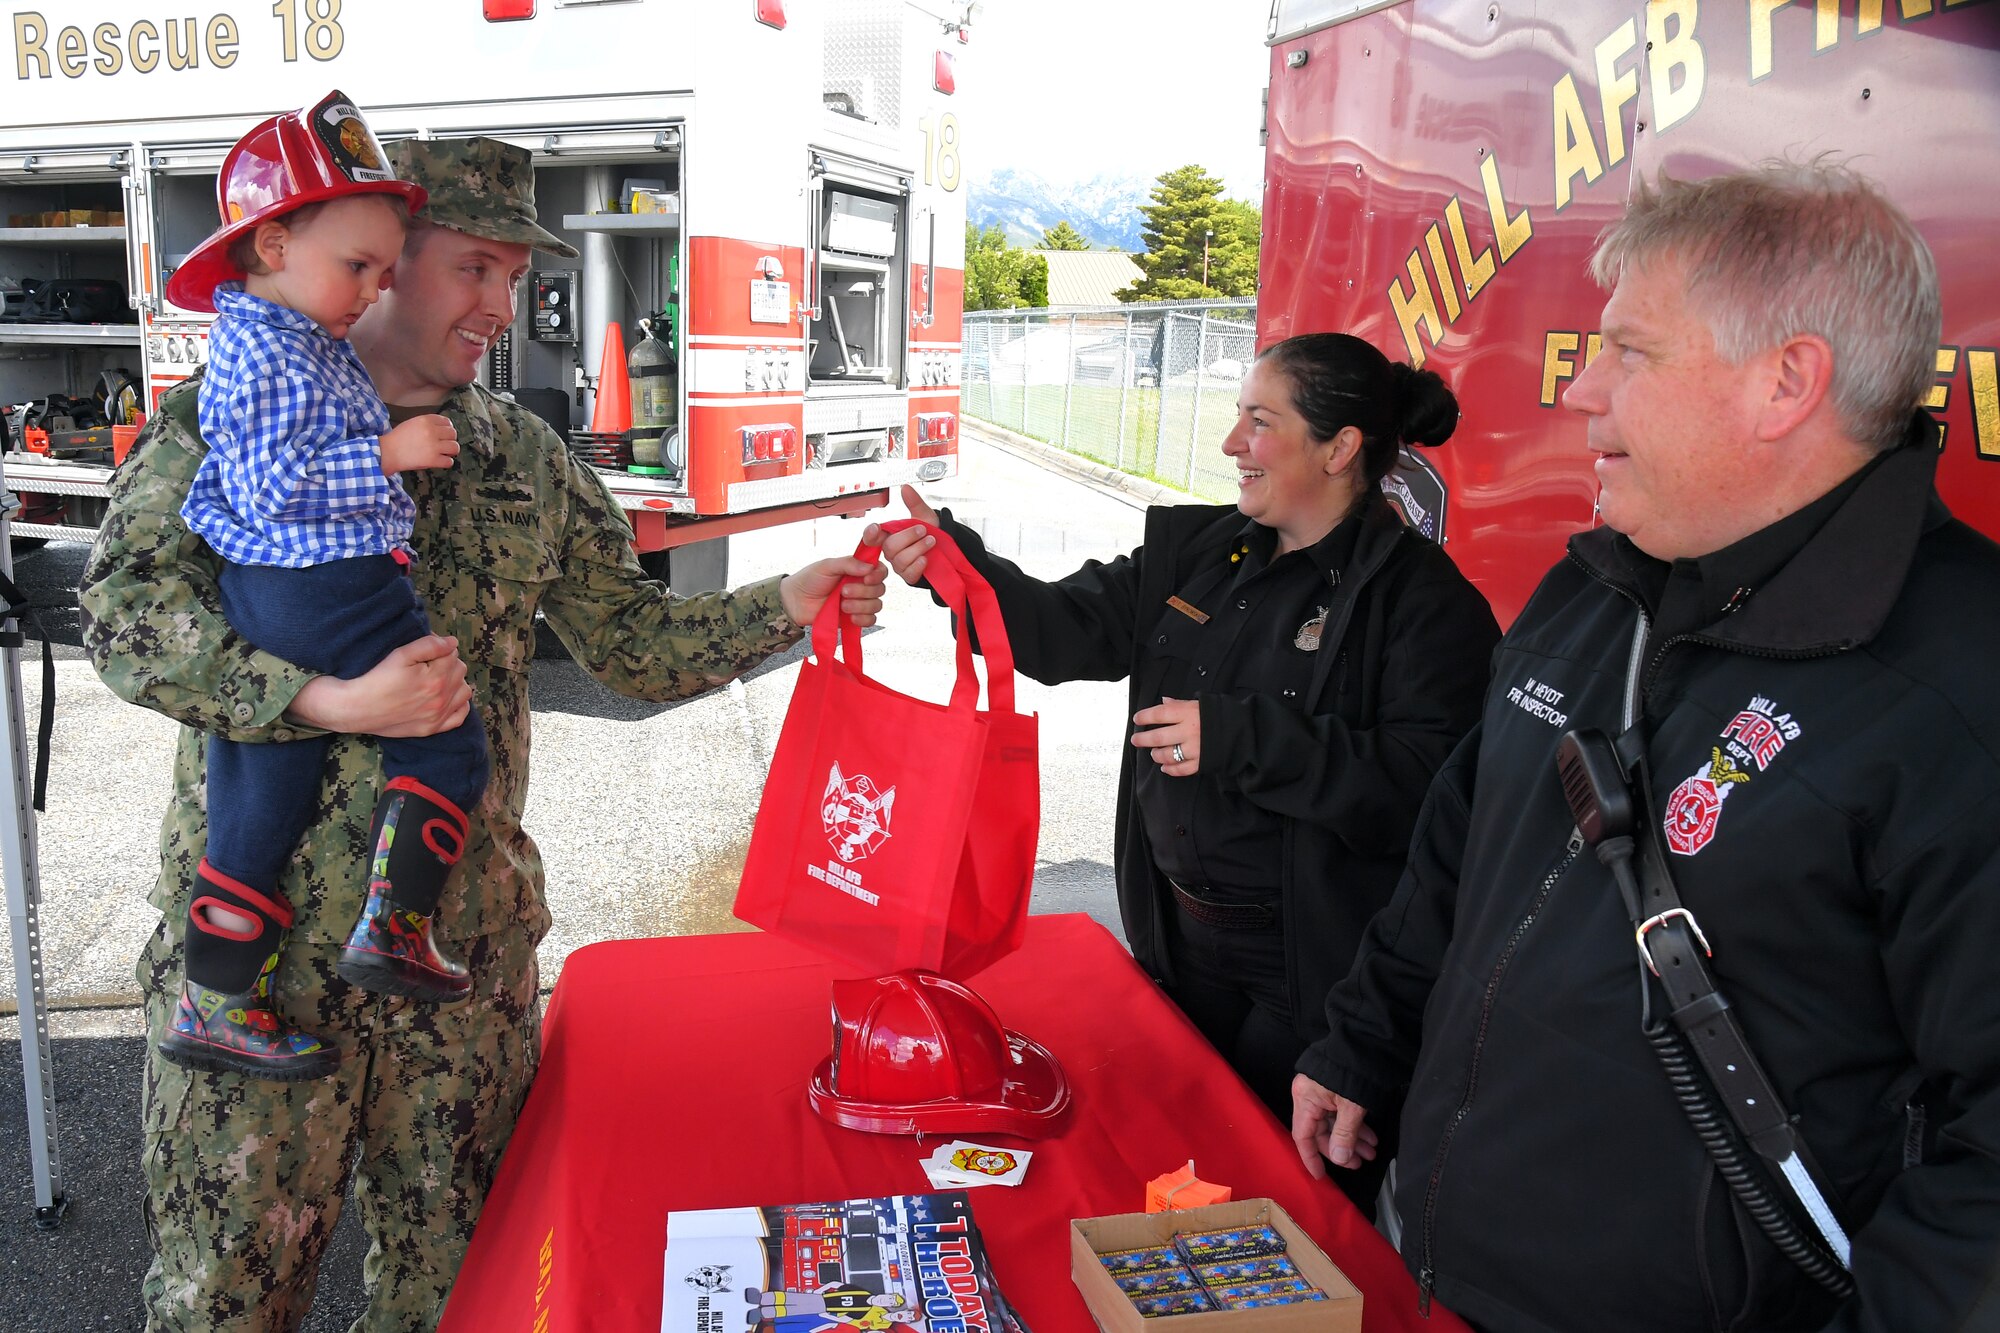 (left to right) Warren and Petty Officer 1st Class Gabe Burns, stop by to look at the Fire Trucks, and receive a child fire fighter helmet and other goodies from Tiana Bykowski and Wolfgang Heydt, both with 775 Civil Engineering Squadron, at the Wheels of Wonder event, May 17, 2019, Hill Air Force Base, Utah. (U.S. Air Force photo by Todd Cromar)